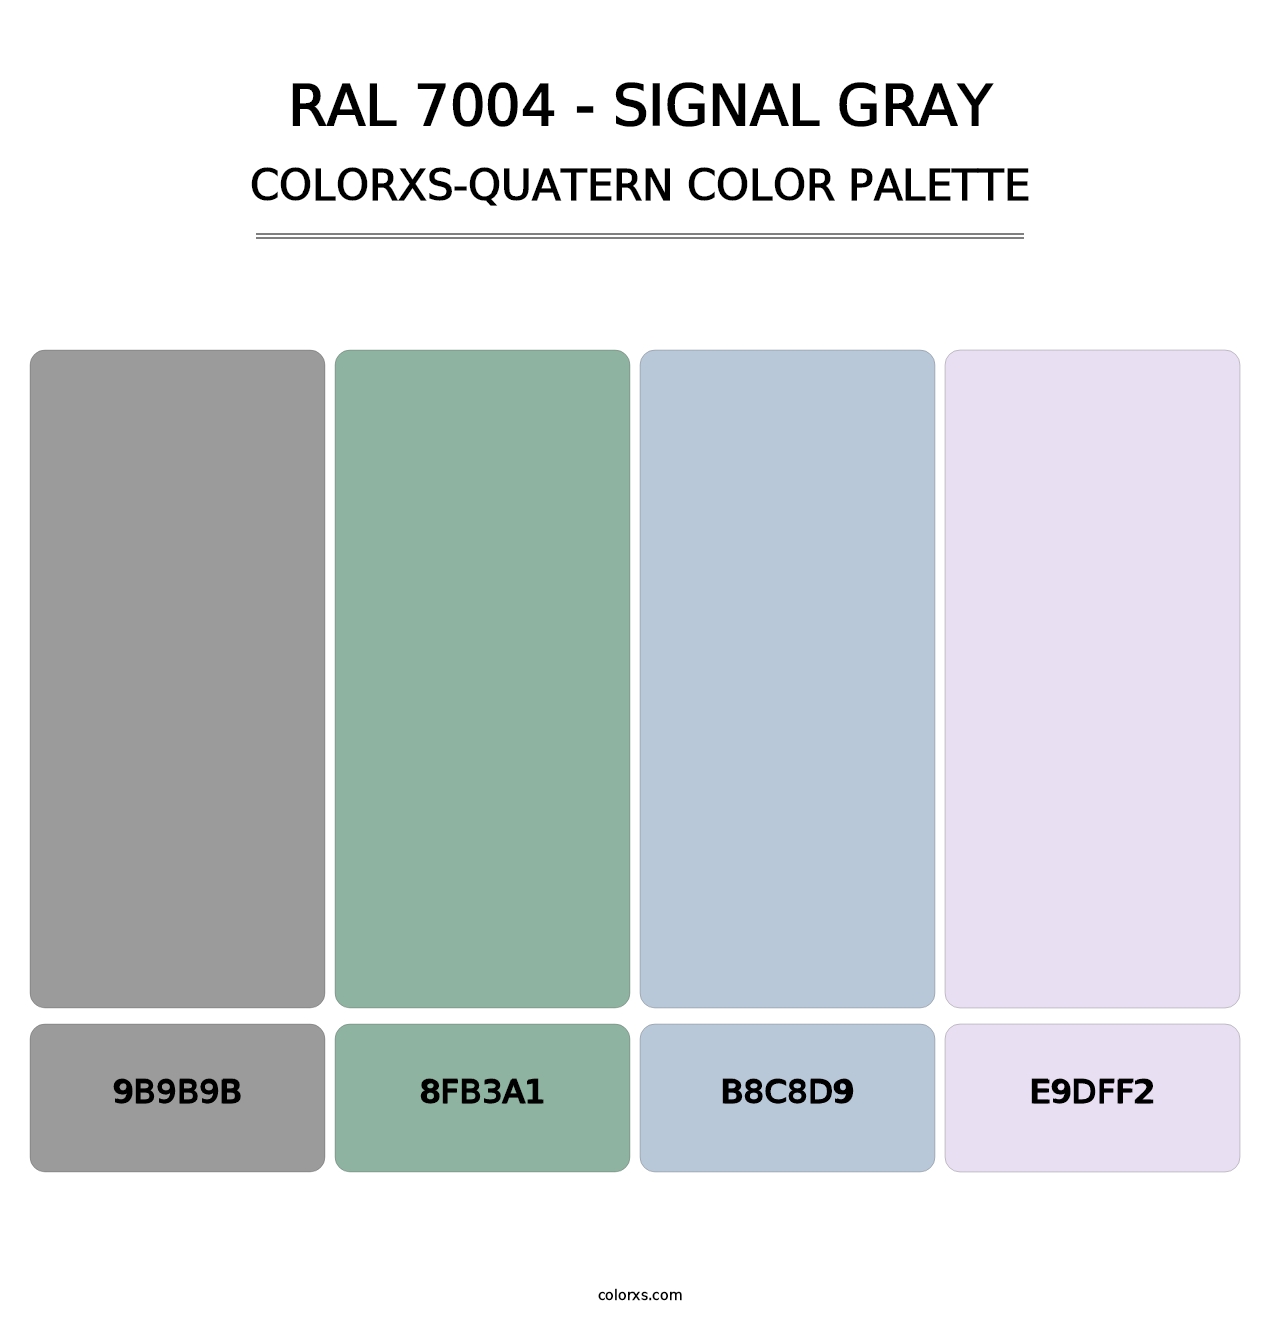 RAL 7004 - Signal Gray - Colorxs Quatern Palette